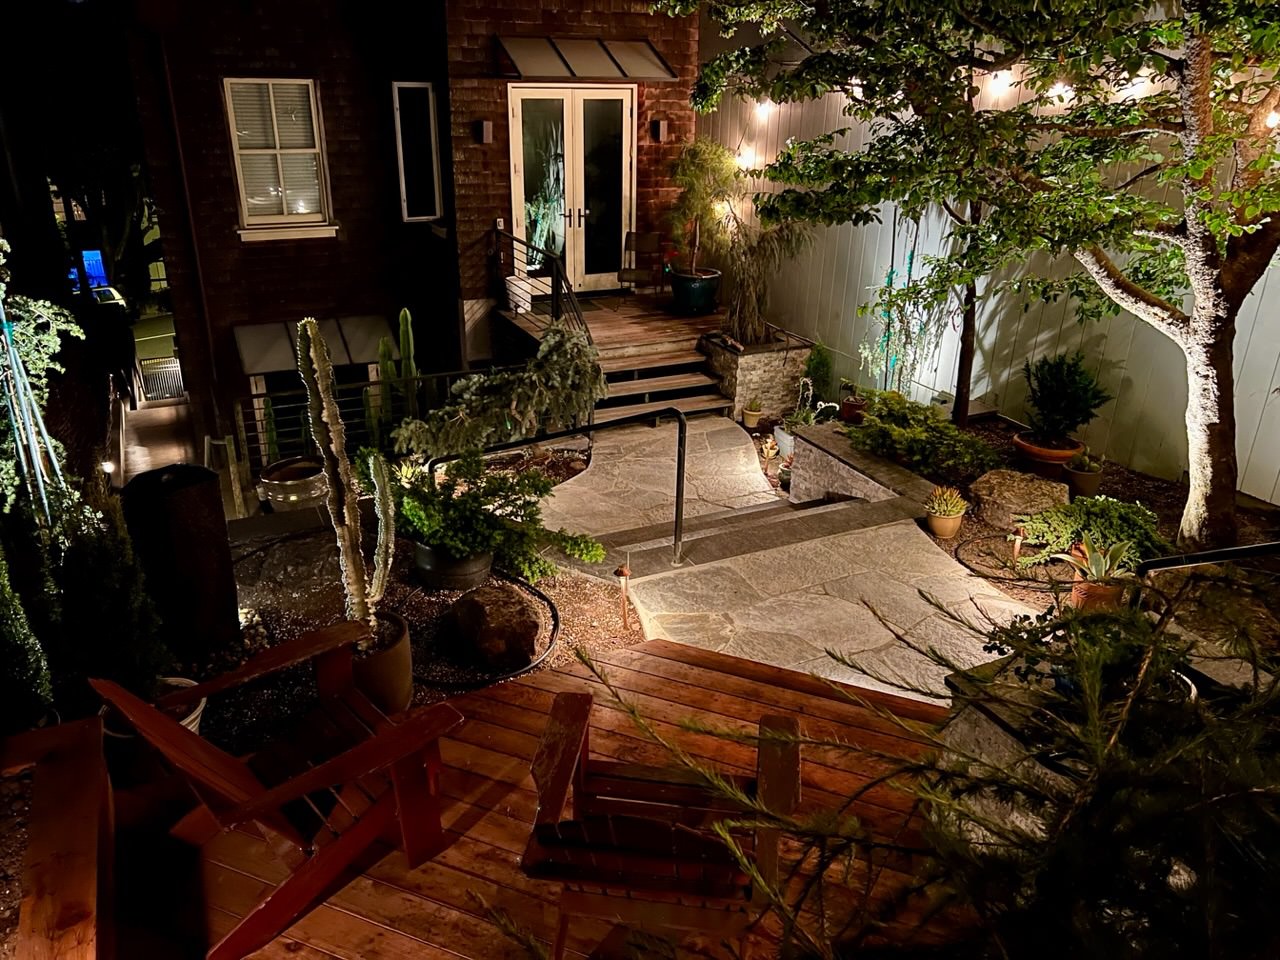 Completed redwood deck in foreground and quartzite flagstone walkway at night.